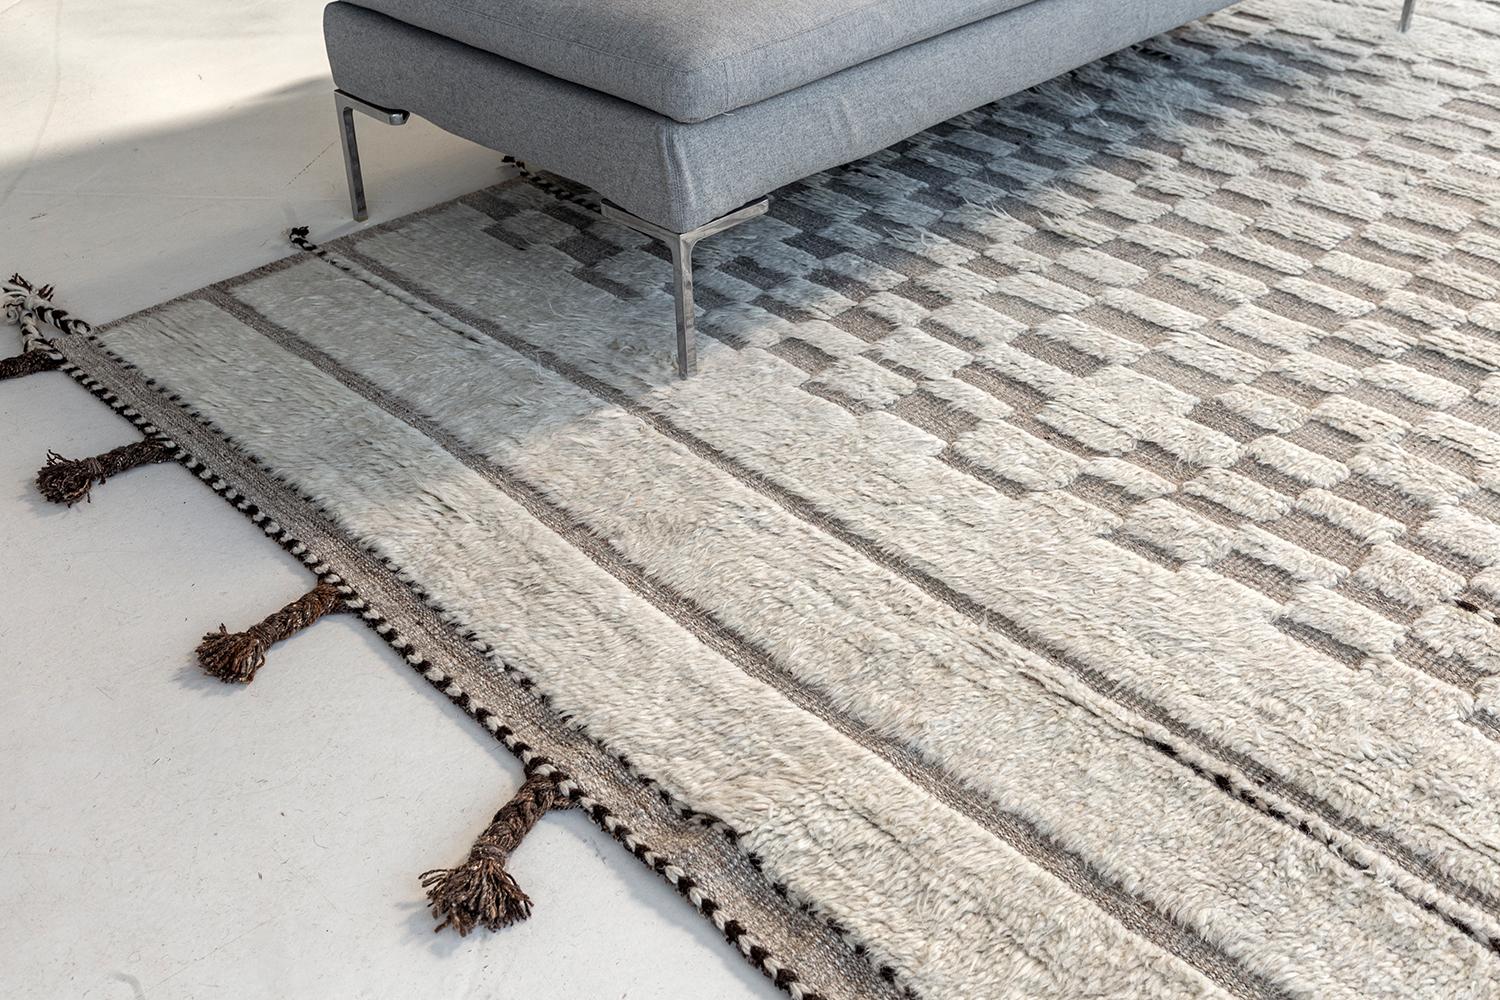 Sirocco is a stunning handwoven ivory rug with embossed detailing in a checkered pattern atop a natural gray pile weave. Beautiful tassels and bordered designs add a time and one of a kind essence for the modern design world. Haute Bohemian